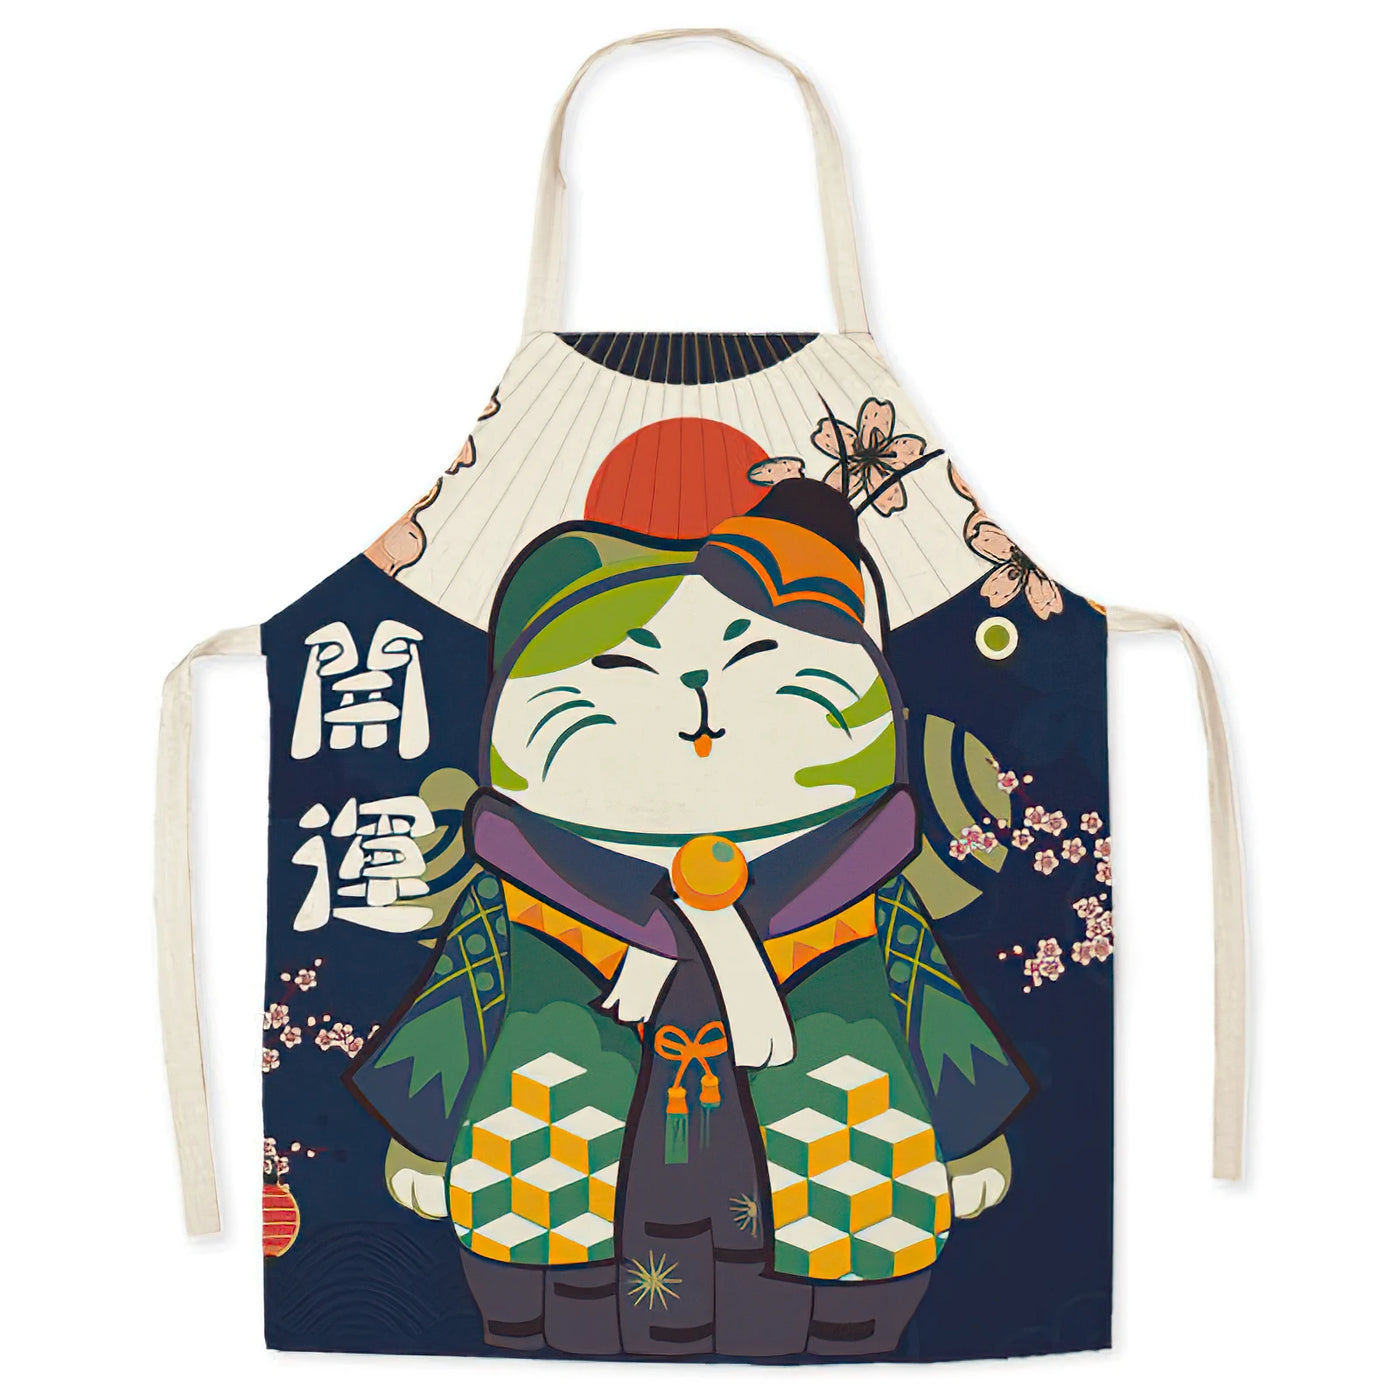 Polyester Apron Cat Adult Child Leeveless Bib Waterproof Oil-Proof Baking Accessories Home Clean Tool Household Kitchen Supplies